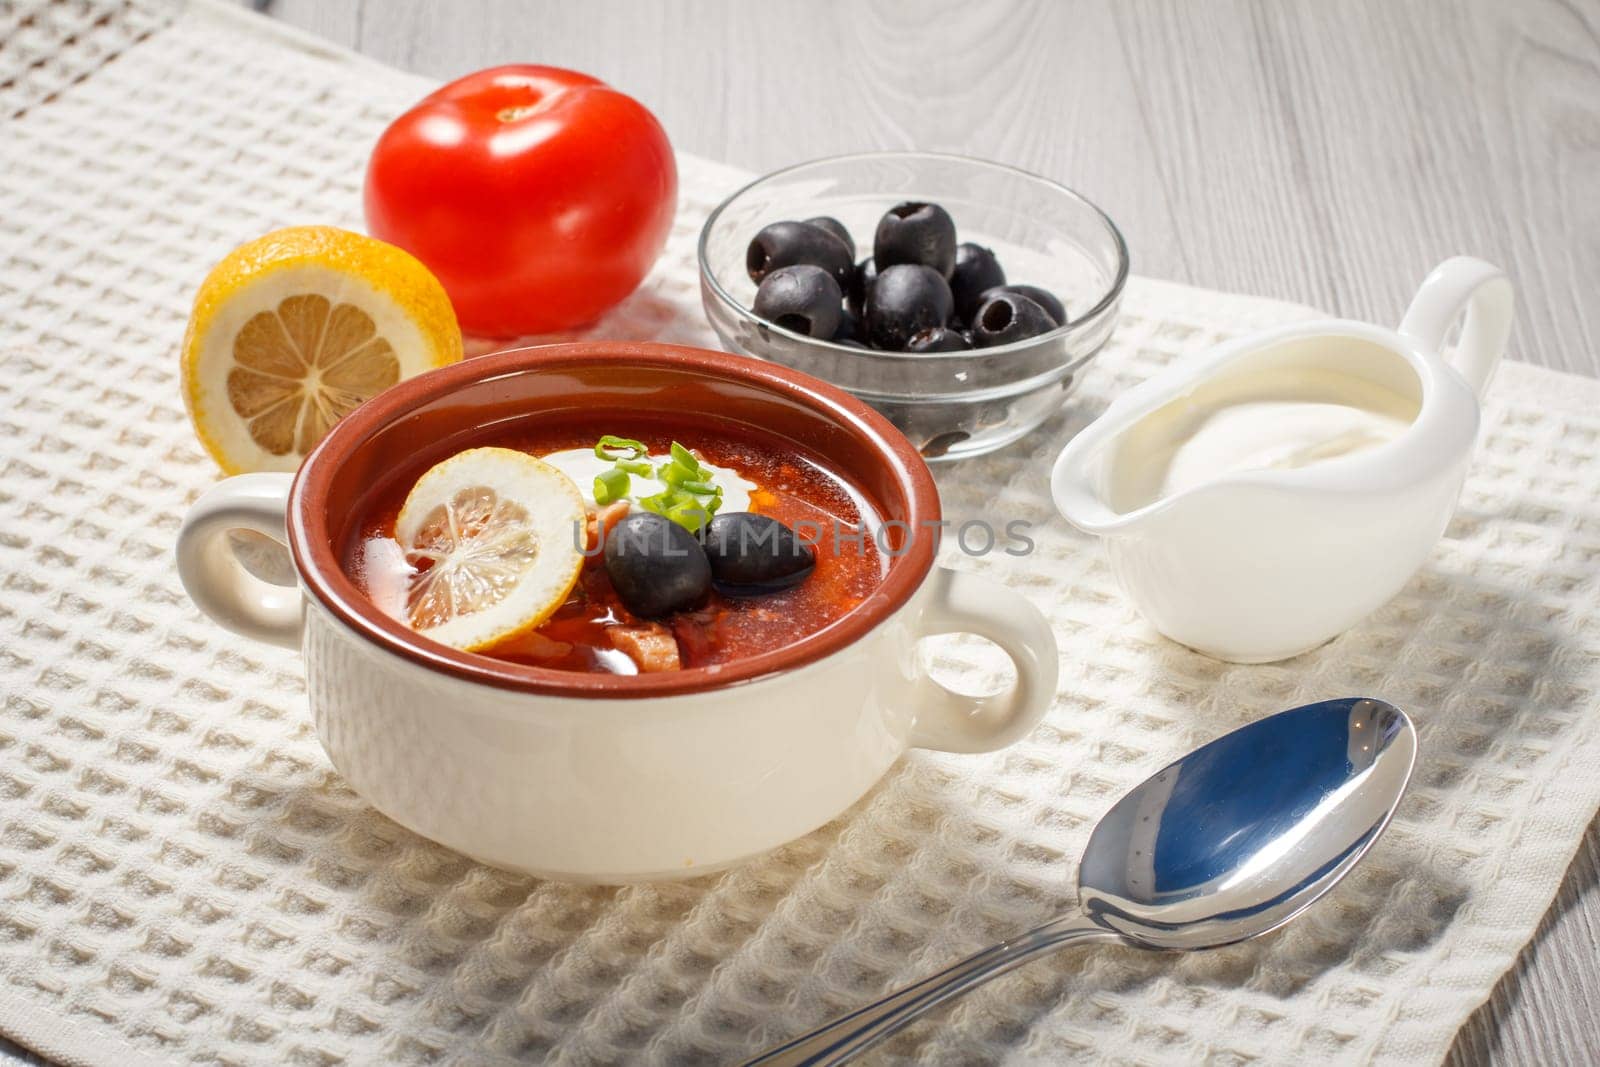 Soup saltwort with meat, smoked sausages, potatoes, tomatoes, marinated pickled cucumber, lemon, black olives and sour cream, ceramic soup bowl with ingredients on white kitchen towel.